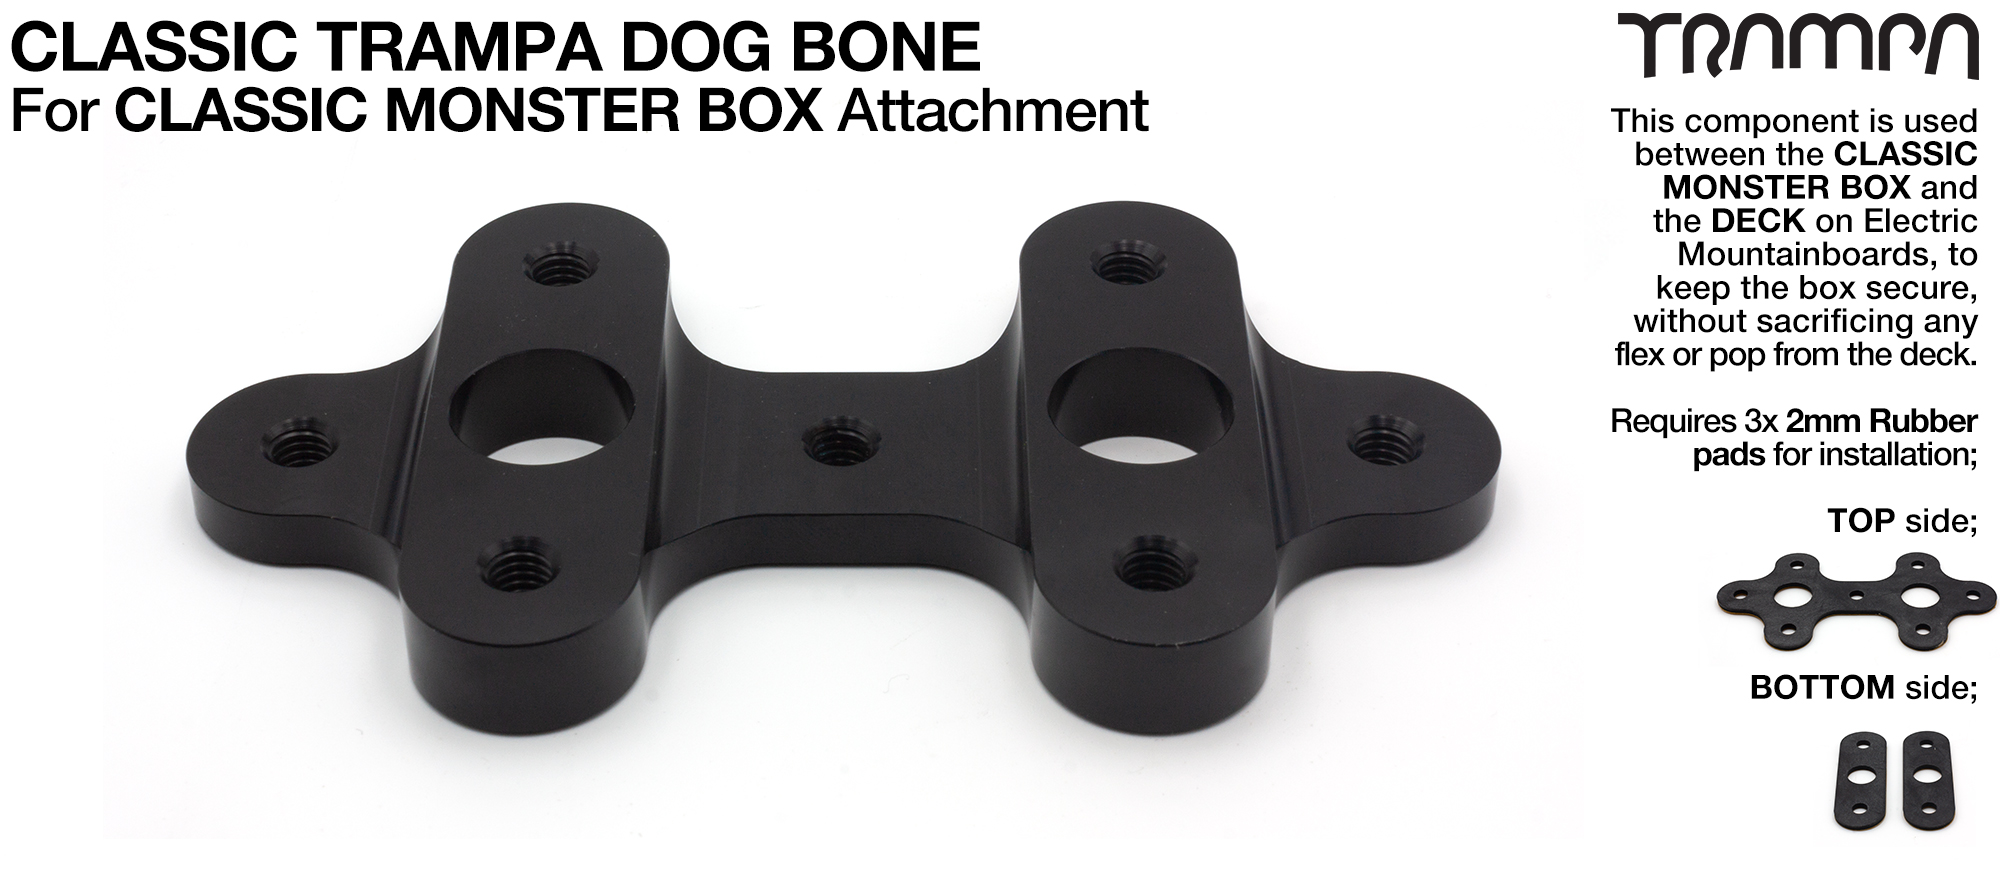 Classic Monster Box DOG BONE is used to mount the Classic Monster box securely to the deck